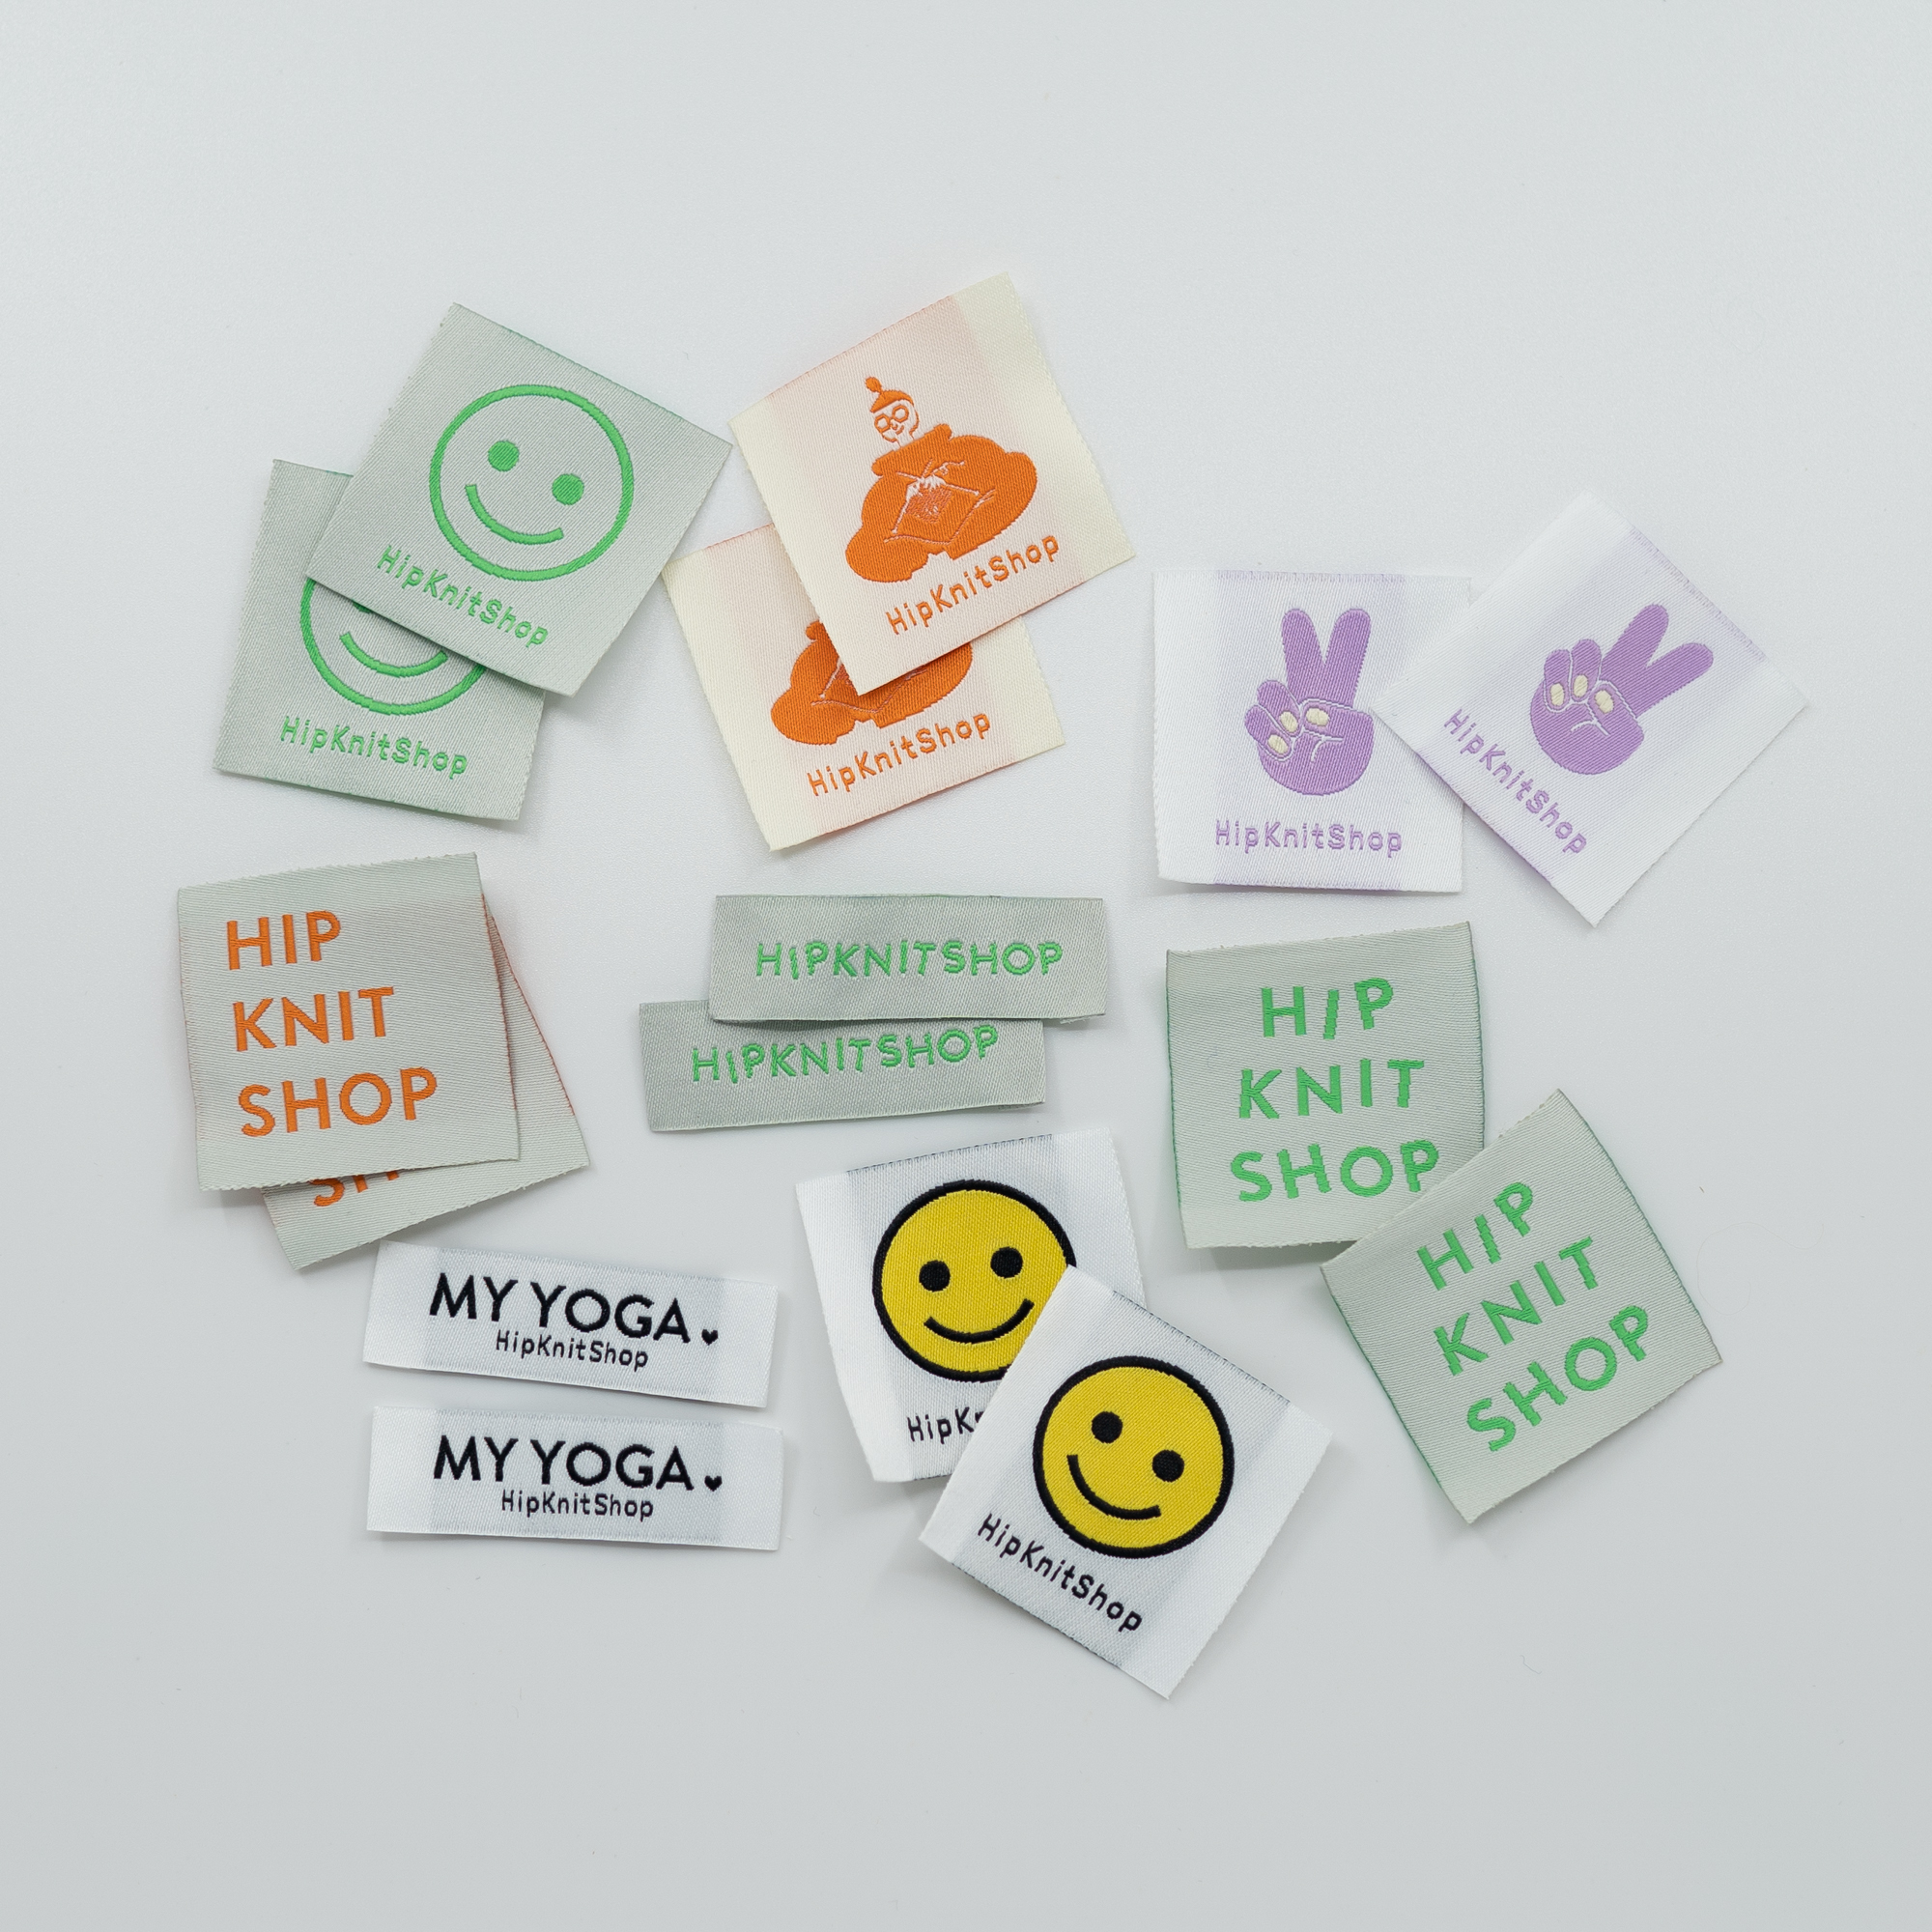  - Smiley label | Labels for knitwear - by HipKnitShop - 03/01/2022